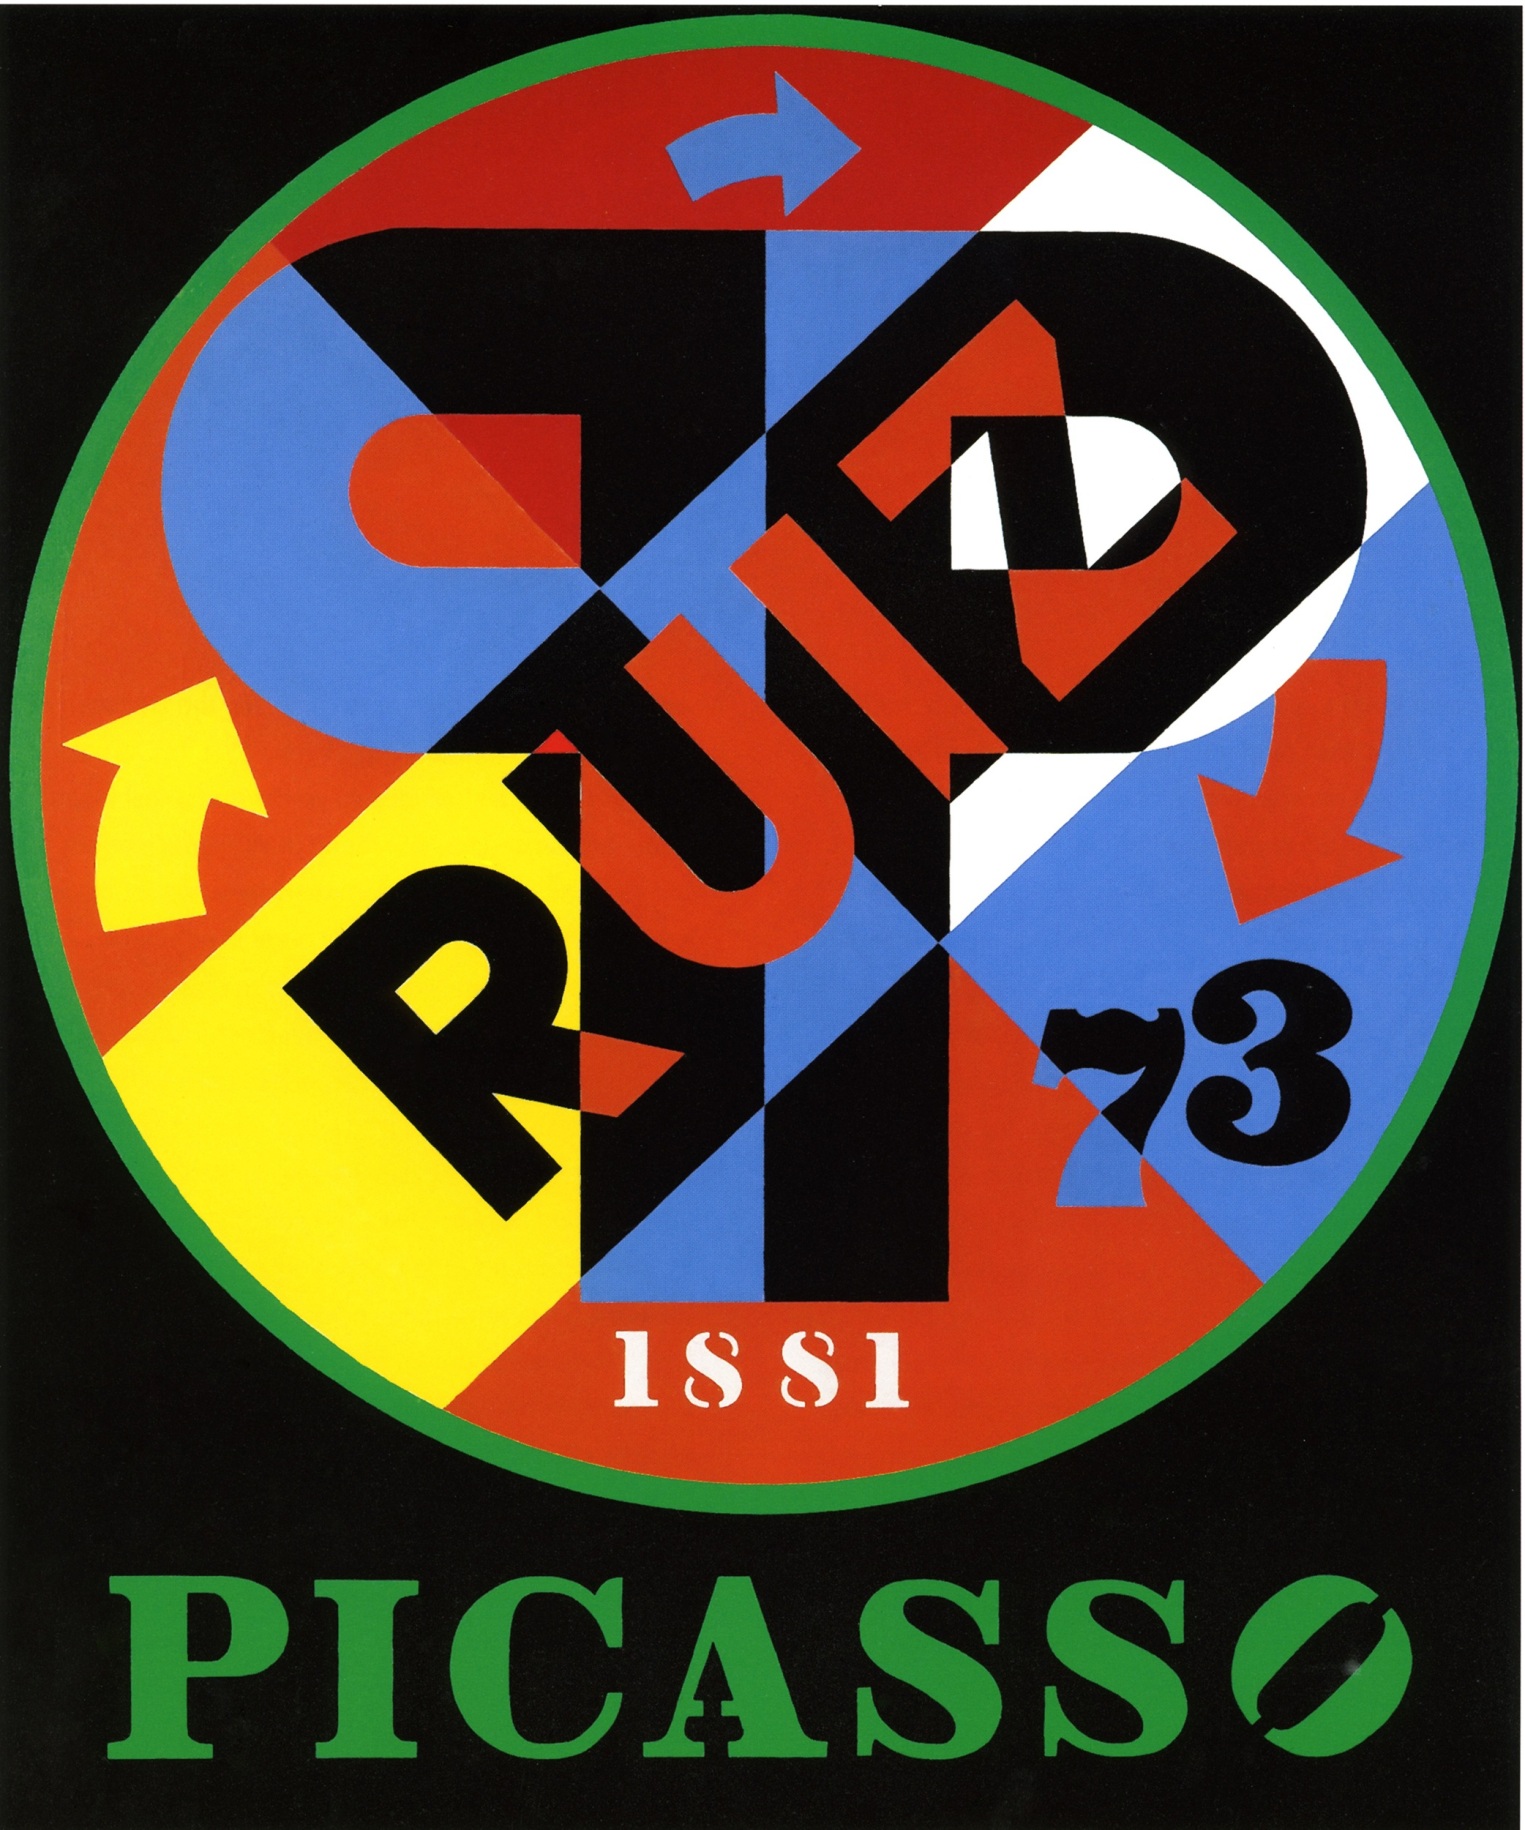 Picasso II is a 60 by 50 inch painting with a black ground and the word Picasso painted in green letters across the bottom of the canvas. Above, and occupying most of the canvas, is a circle with a green outline. Dominating the circle are two blue and black large letter &quot;P&quot;s, back to back. In a diagonal band across the circle and over the Ps is the name &quot;Ruiz,&quot;painted in black and red letters. The date 1881 is painted in white numbers at the bottom of the circle, and to the right is the date 73 in blue and black numbers, with a red arrow above it. A yellow arrow appears in the middle left side of the circle, and a blue arrow at the top of the circle.